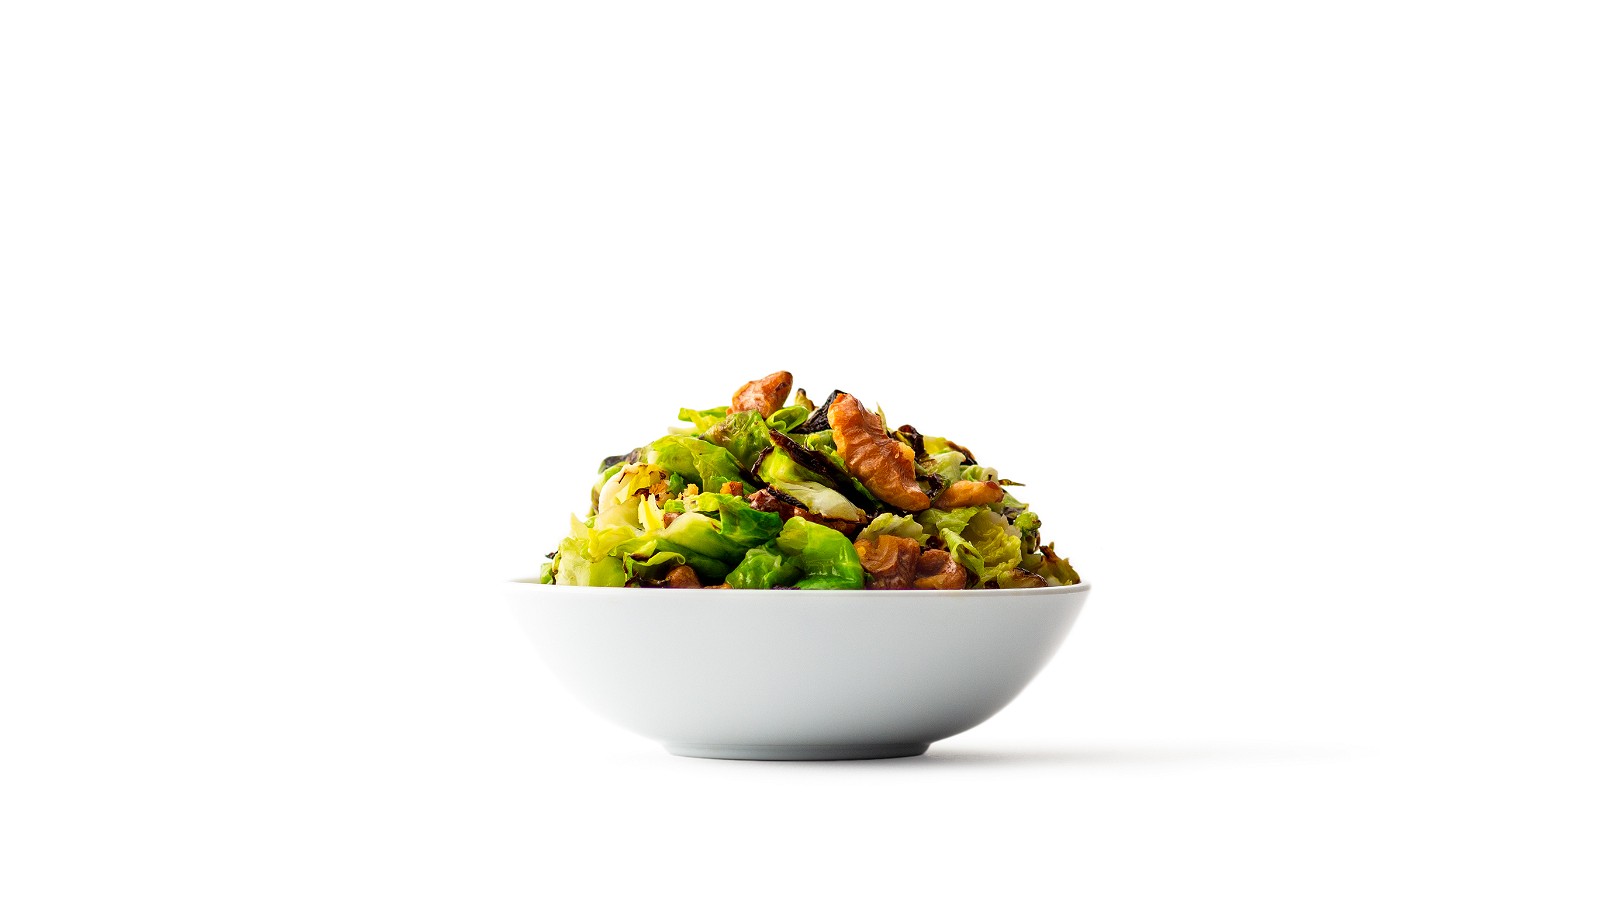 Image of pan-fried brussel sprouts